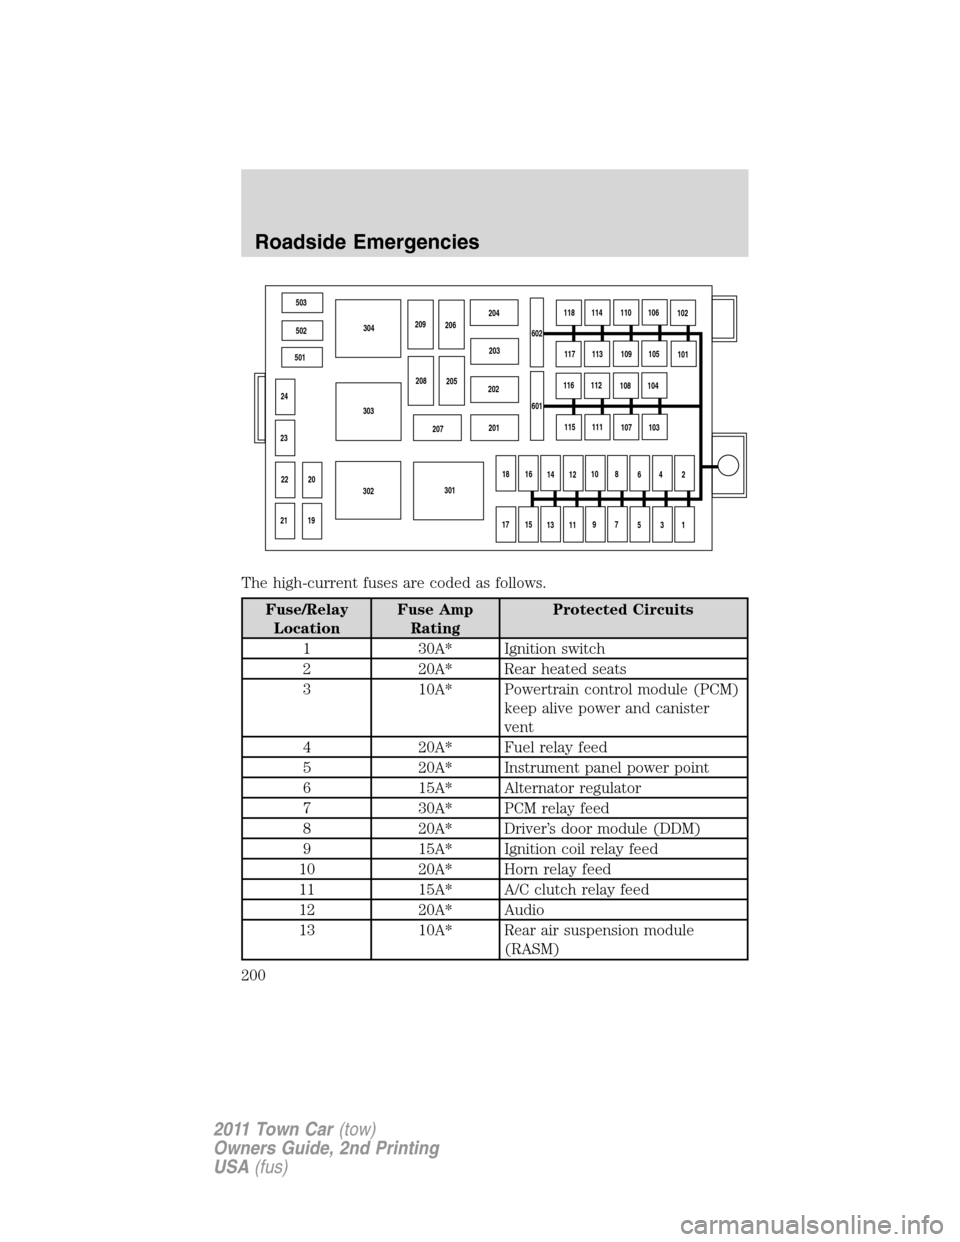 LINCOLN TOWN CAR 2011  Owners Manual The high-current fuses are coded as follows.
Fuse/Relay
LocationFuse Amp
RatingProtected Circuits
1 30A* Ignition switch
2 20A* Rear heated seats
3 10A* Powertrain control module (PCM)
keep alive powe